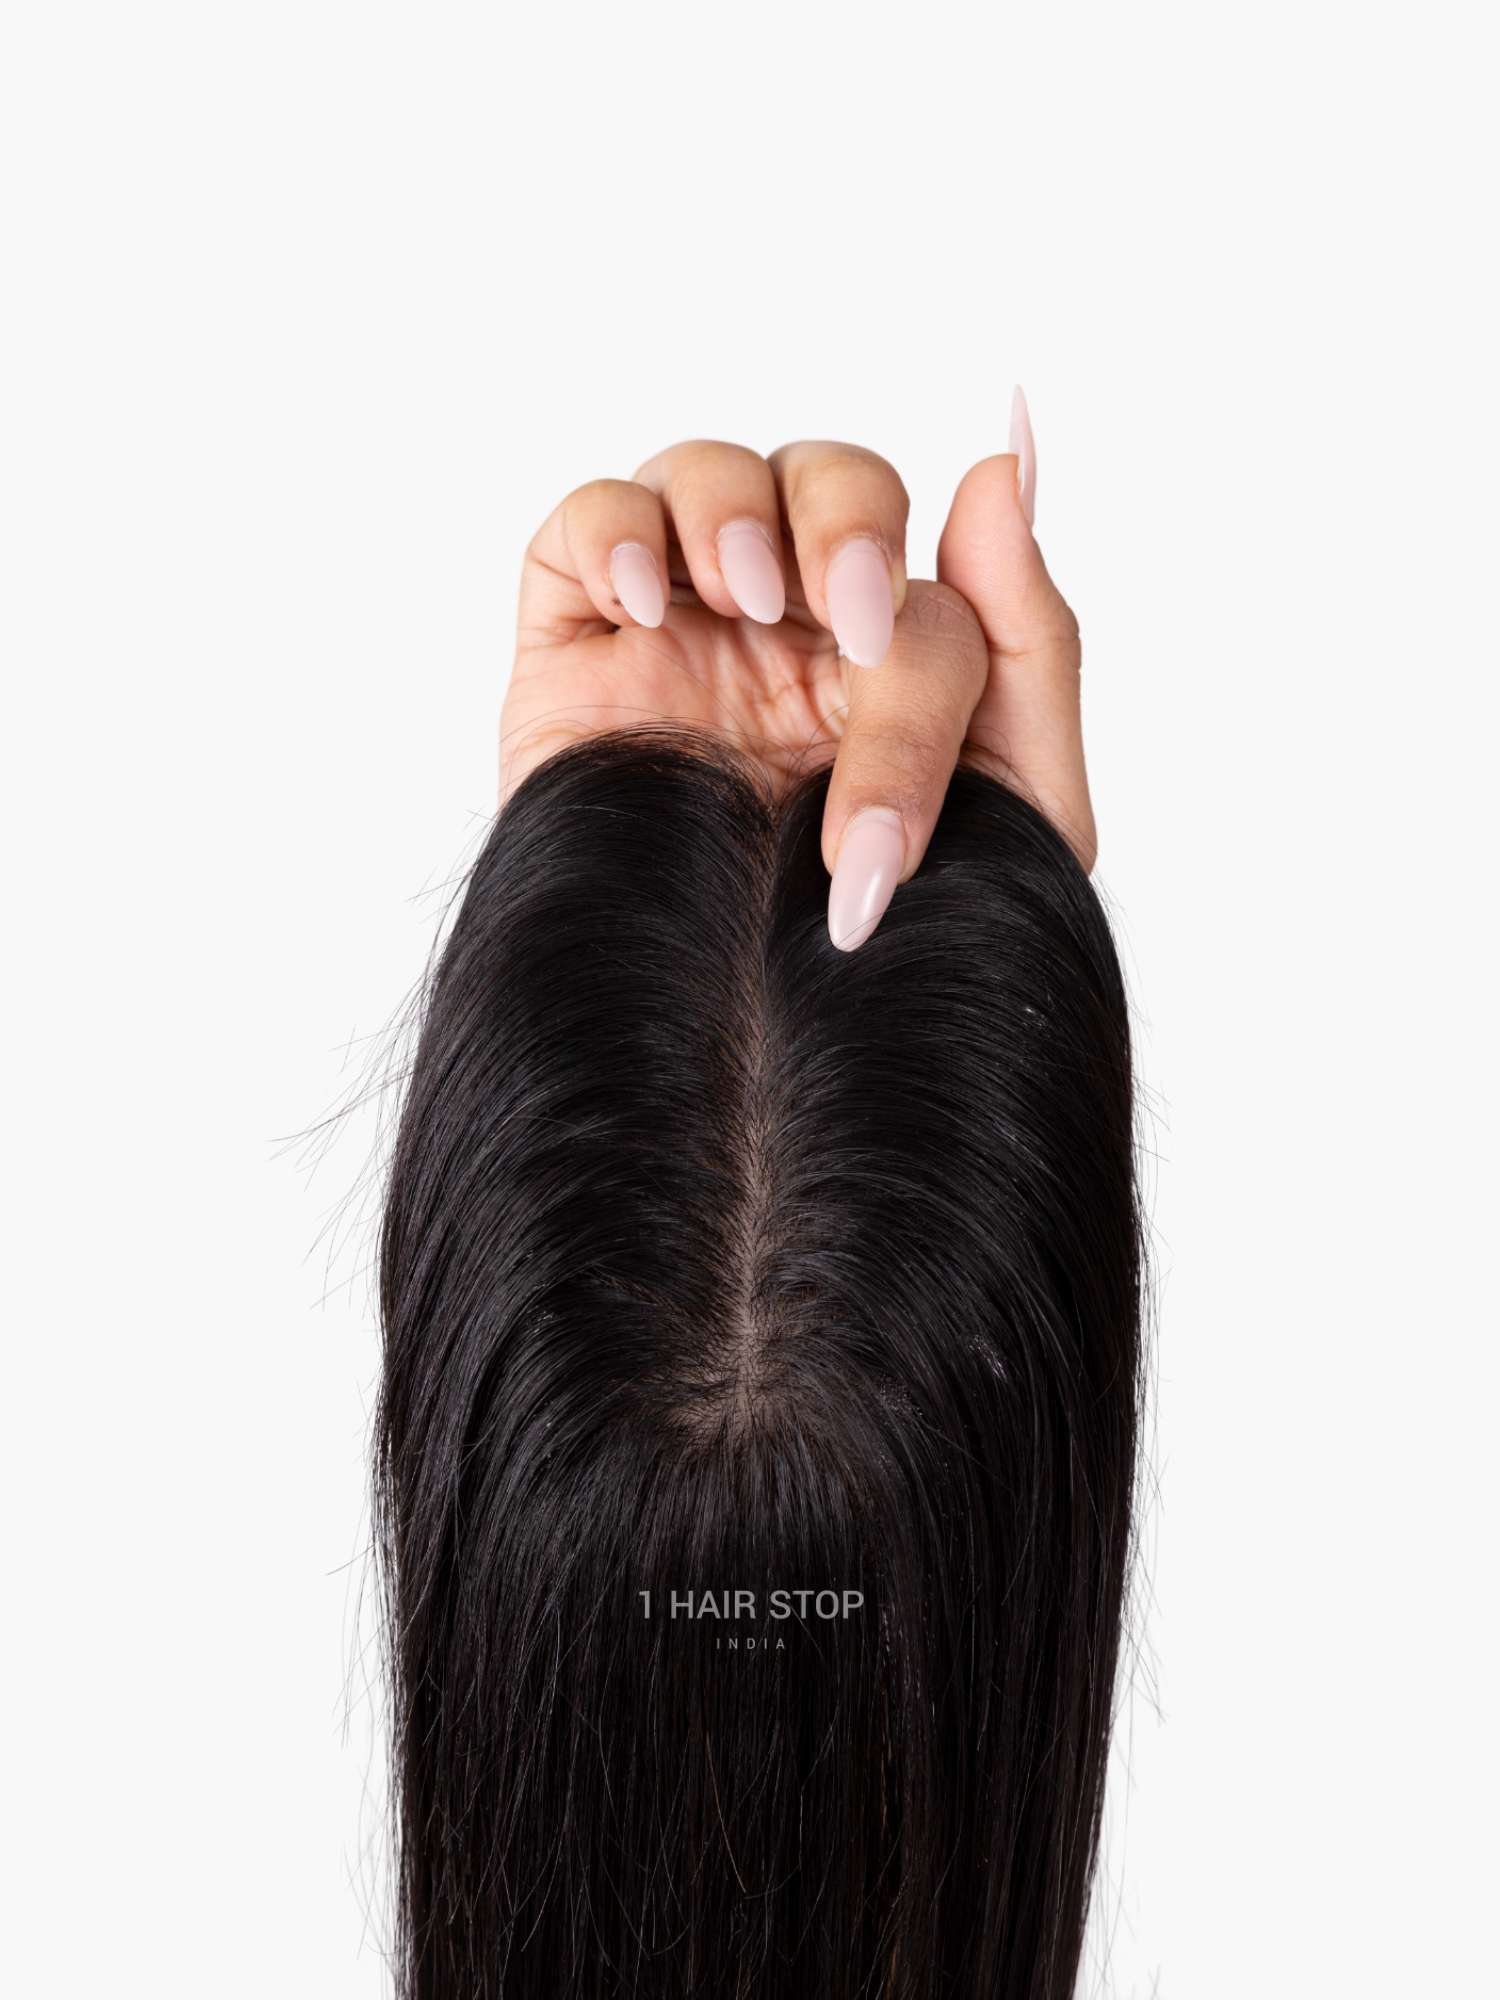 1 Hair Stop India Launches Braided Ponytail Extensions for Quick and Easy  Hair Transformations